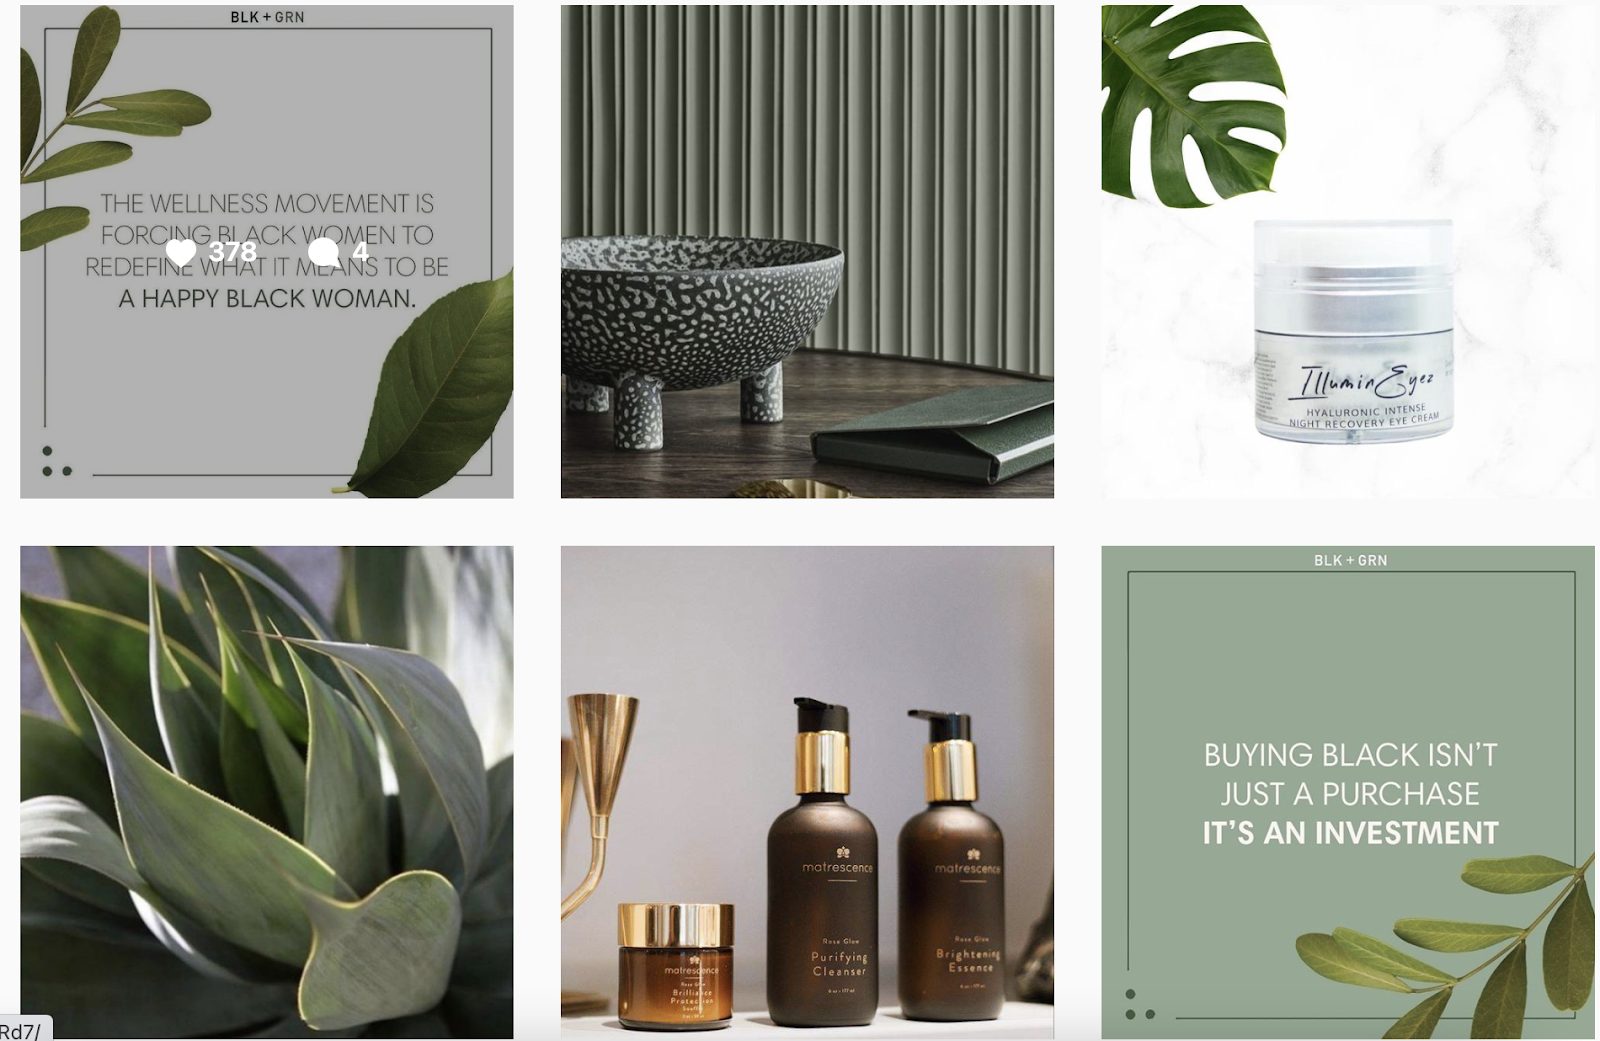 One-stop platforms for green beauty & skincare products - BLk + GRN Instagram